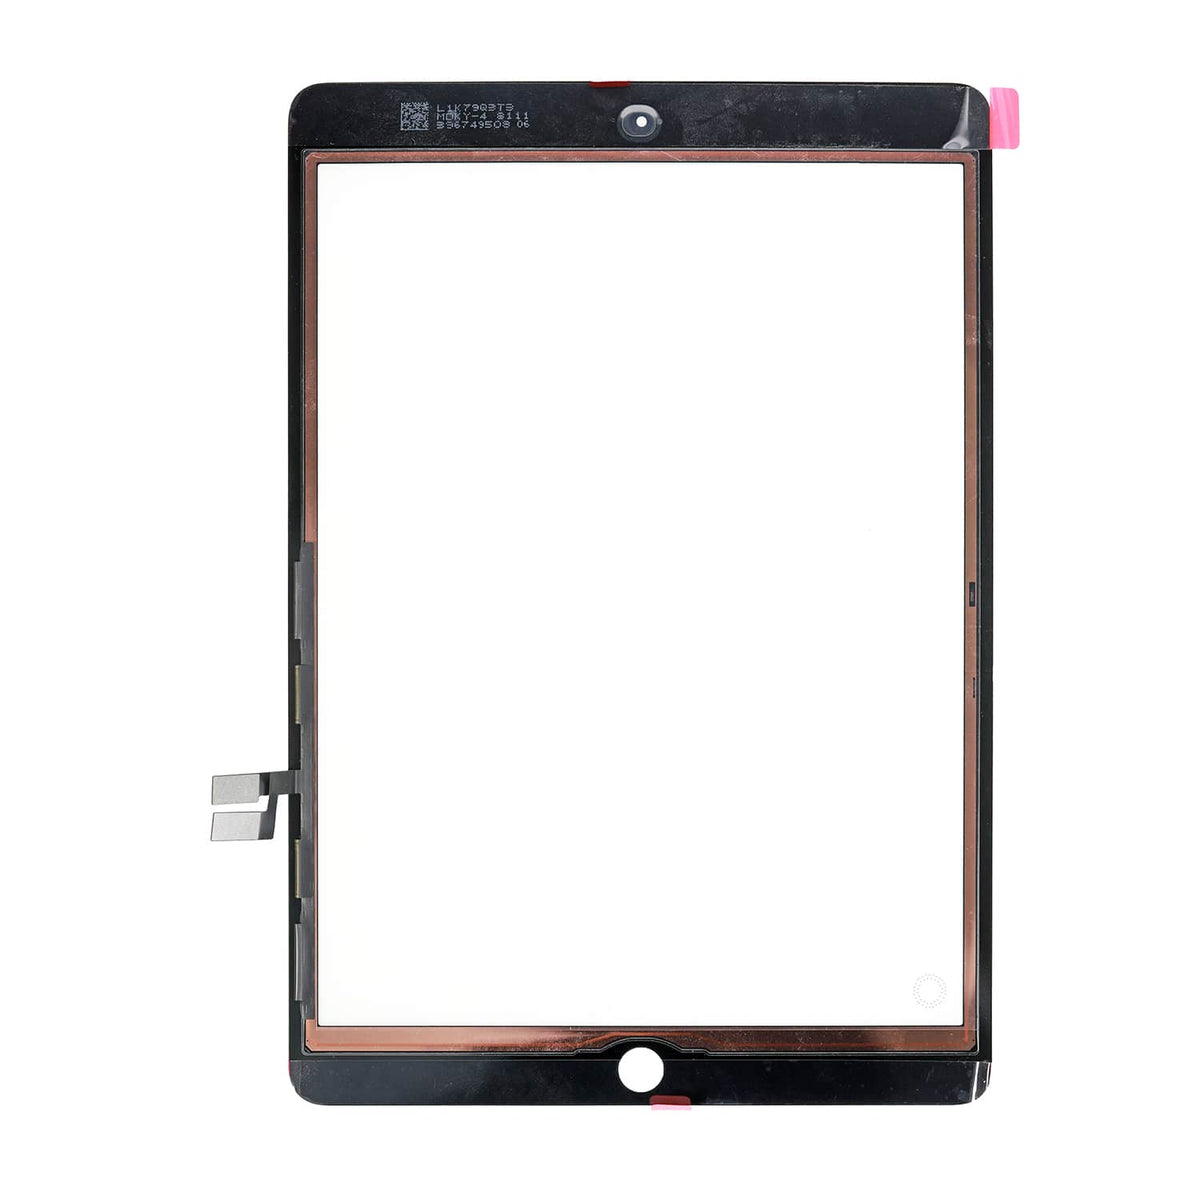 BLACK TOUCH SCREEN DIGITIZER FOR IPAD 10.2" 7TH/8TH